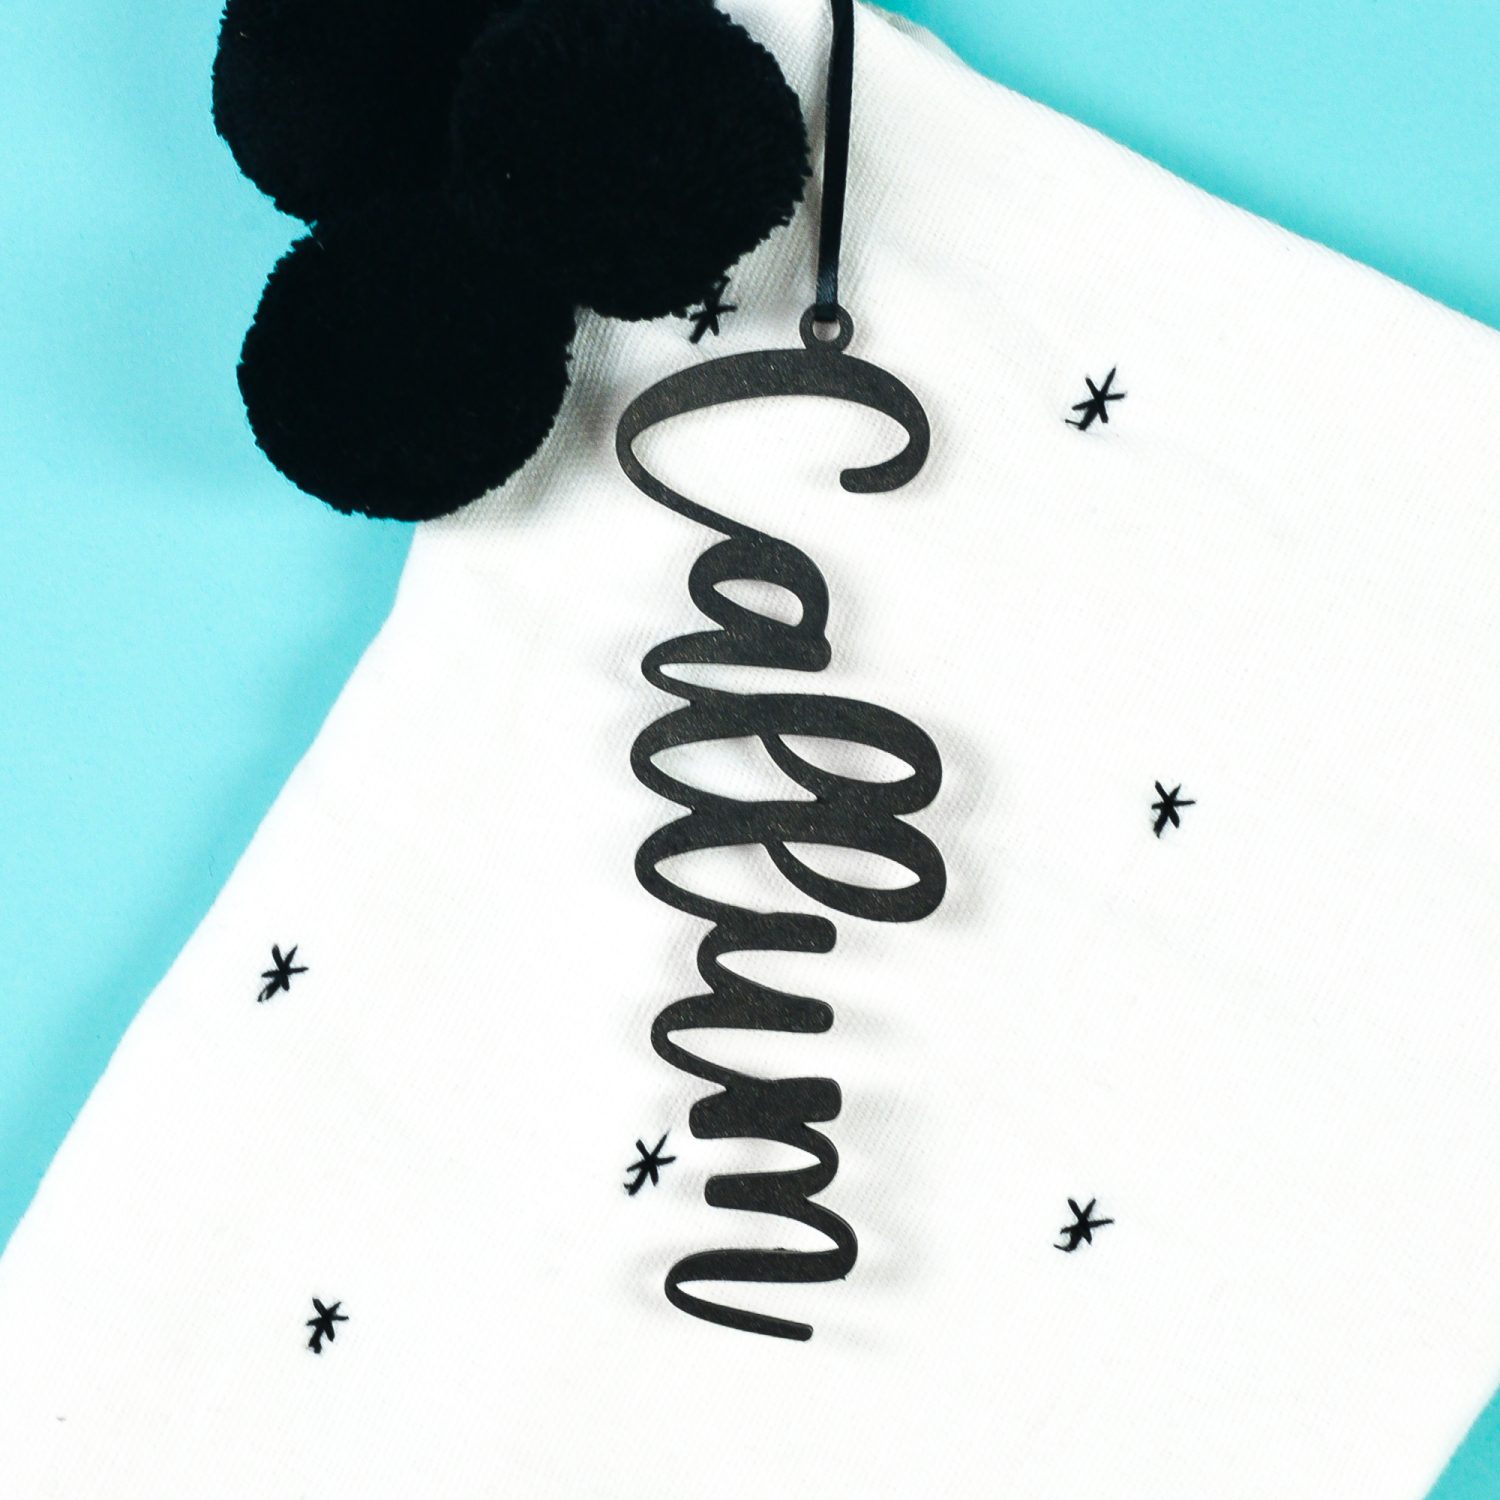 White stocking with black "Callum" tag on teal background